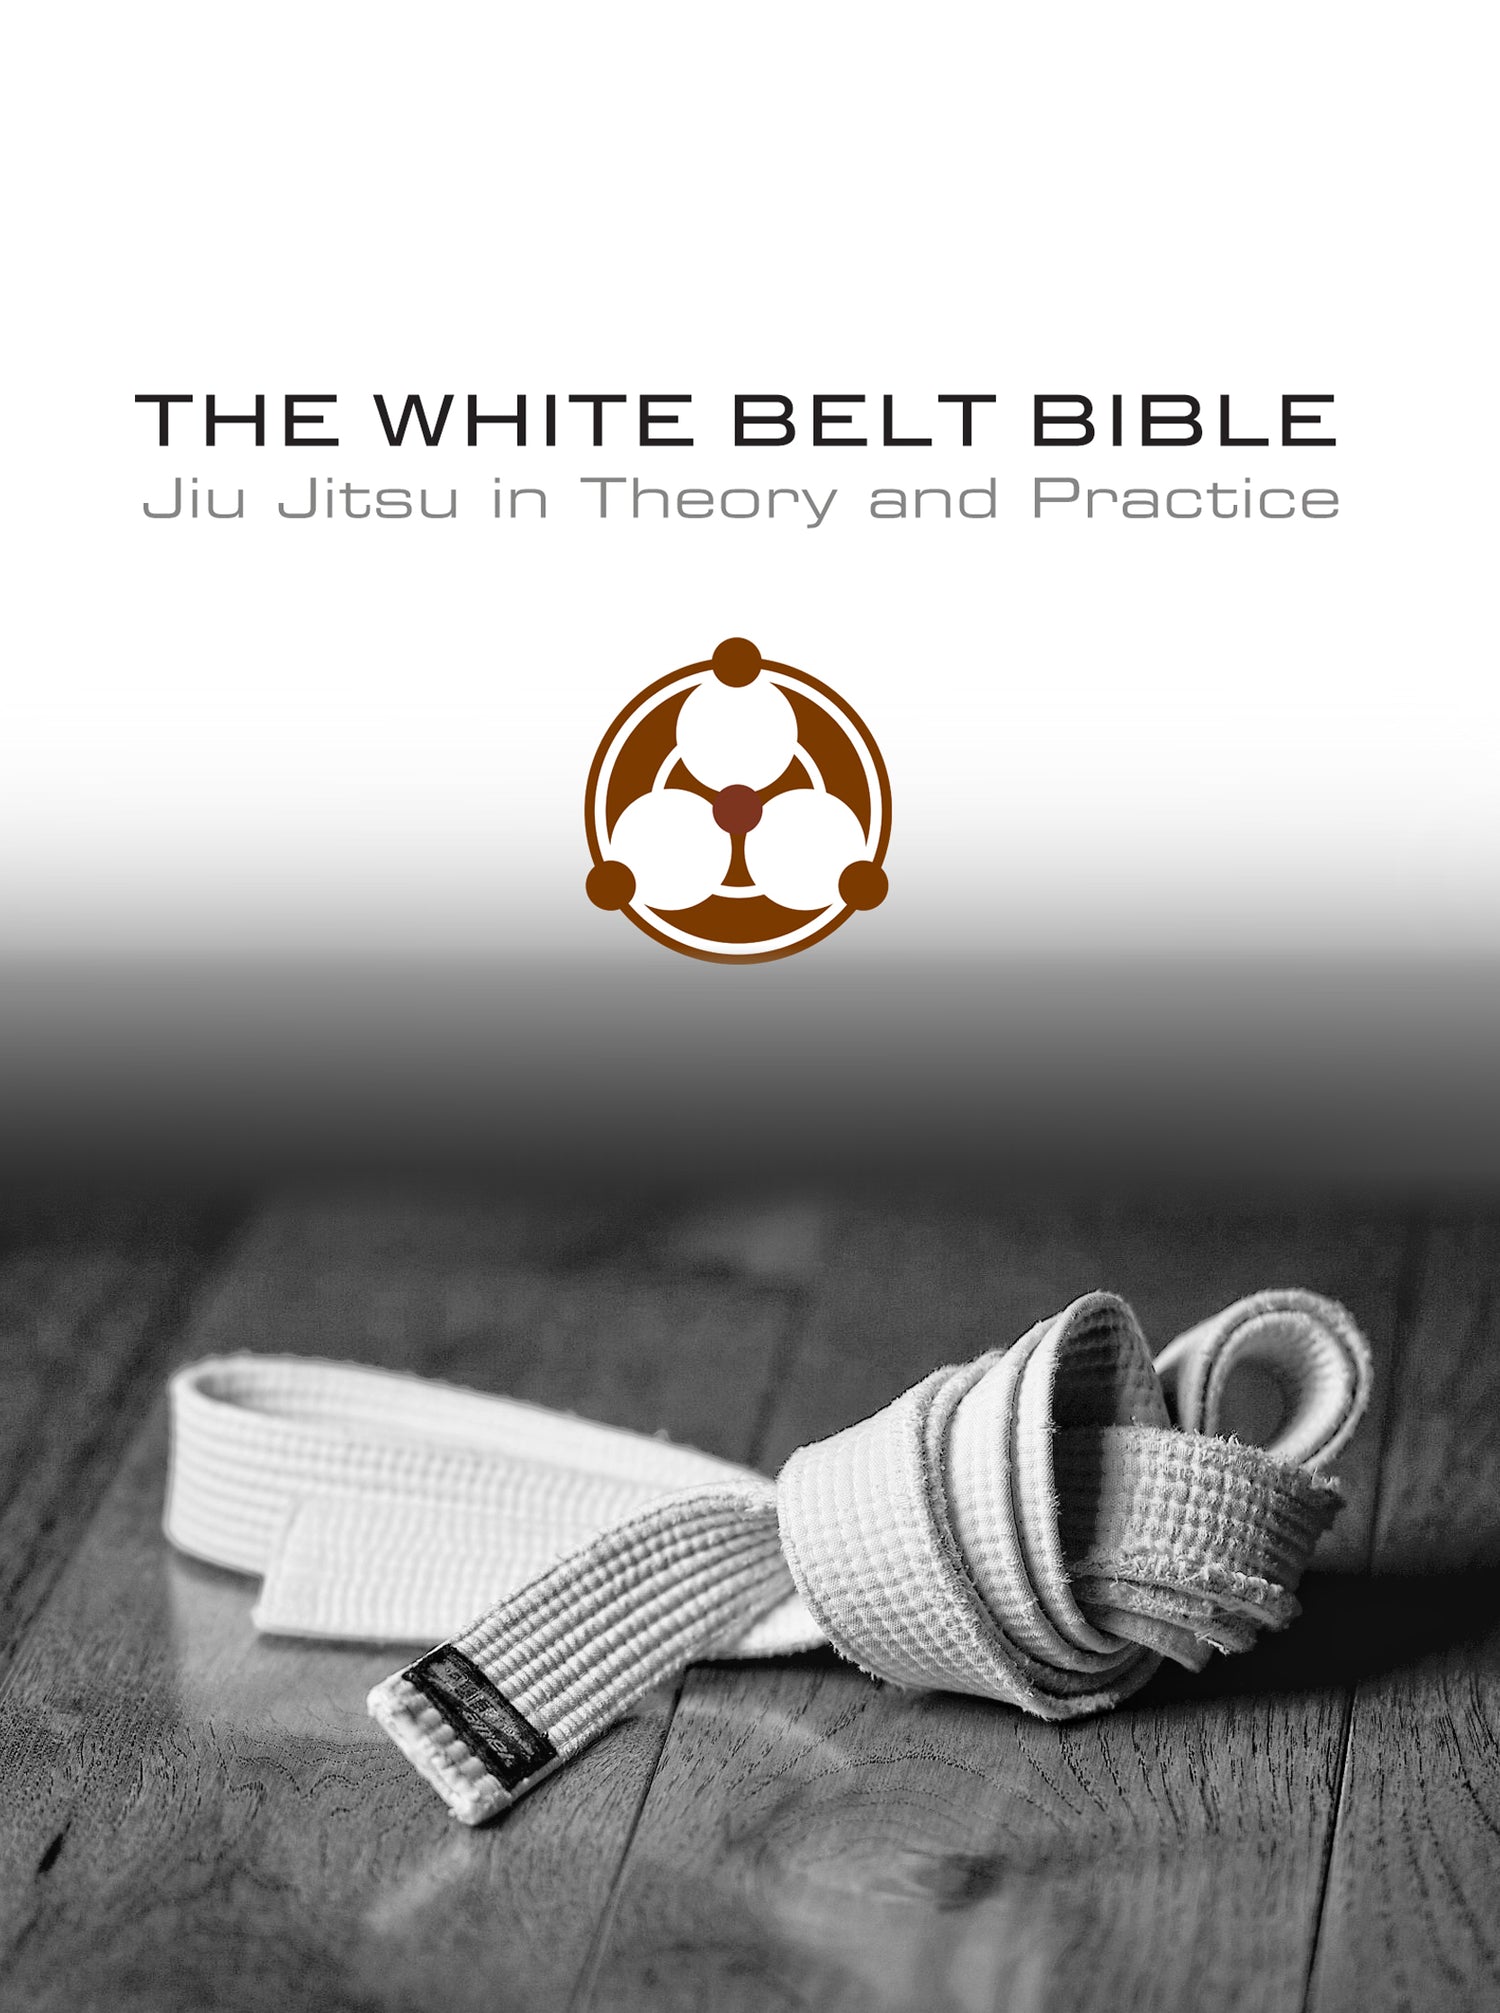 White Belt Requirements by Roy Dean (On Demand) - Budovideos